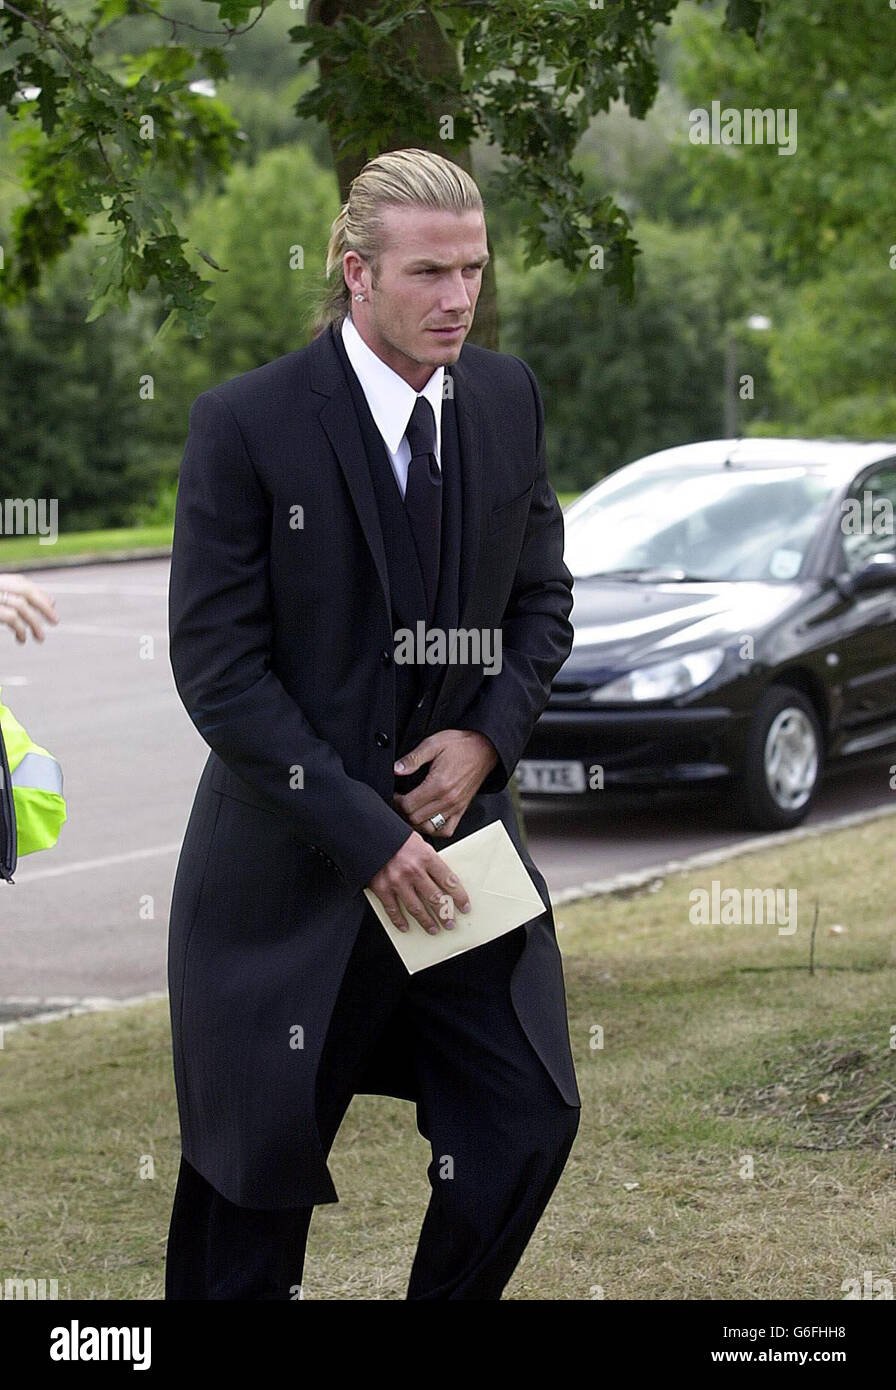 England Captain David Beckham arrives at Redditch Crematorium for the funeral of former Manchester United team mate Jimmy Davies. The service in memory of Jimmy Davis, who was on loan at Watford from Manchester United when he was killed in a car crash on the M40 in Oxfordshire on the first day of the Nationwide League season, was being held at the crematorium in his home town of Redditch, Worcestershire. Stock Photo